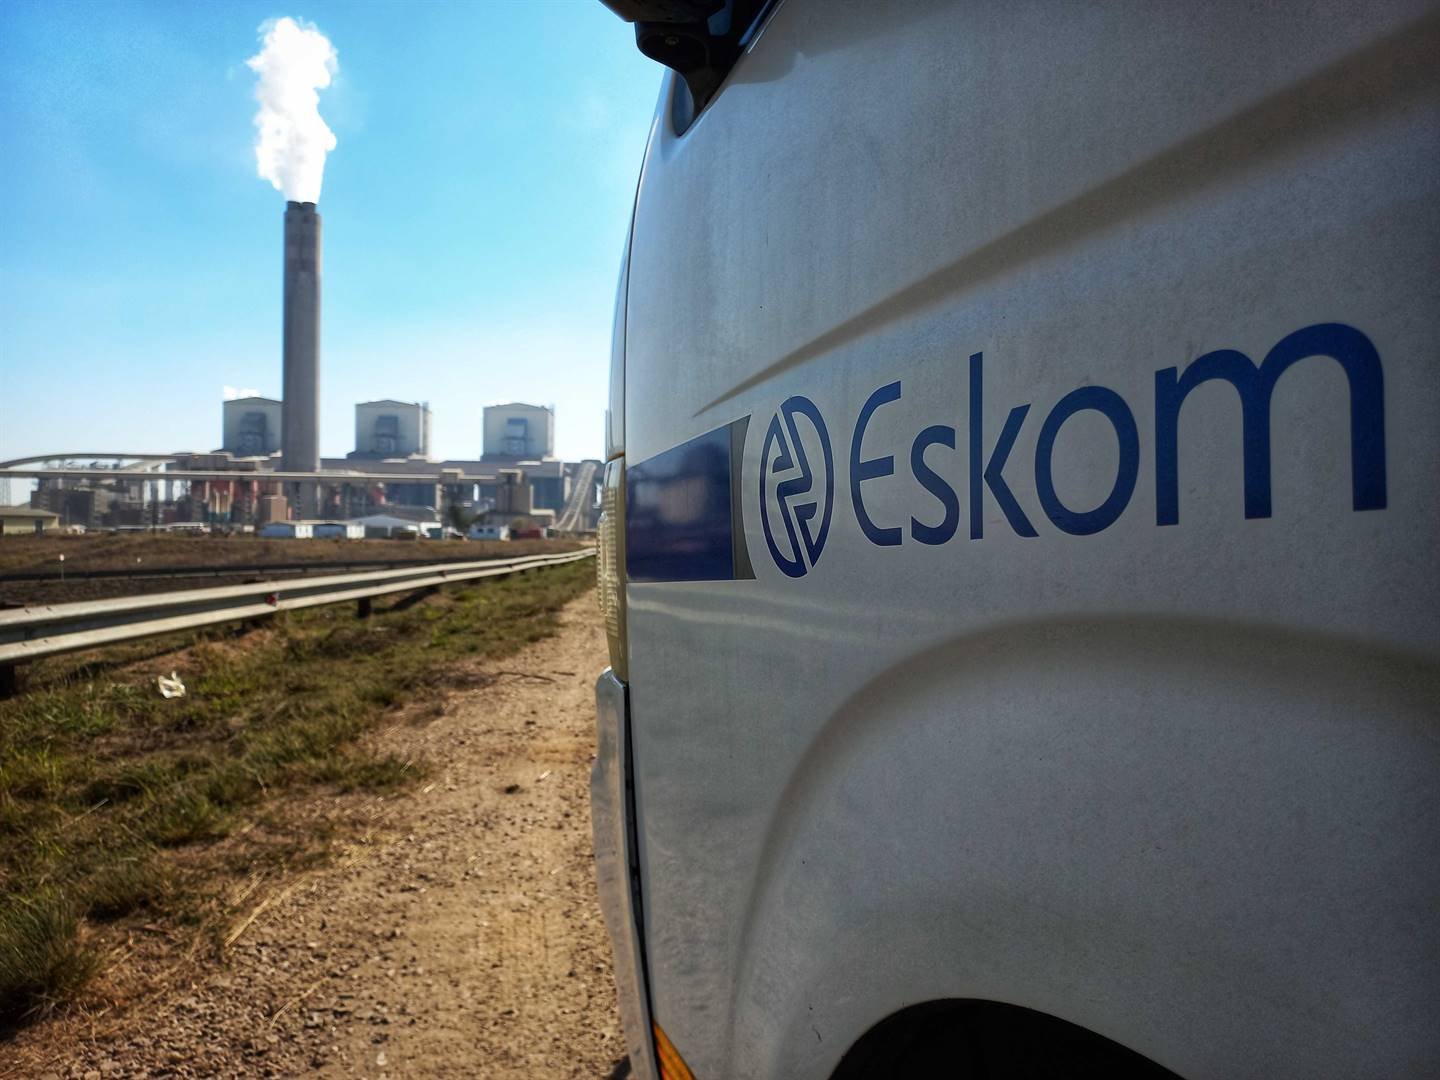 Eskom has cancelled a tender to build a new corporate identity for the Eskom group of companies. The scope of work included the redesign of the Eskom logo. (William Horne/Netwerk24)